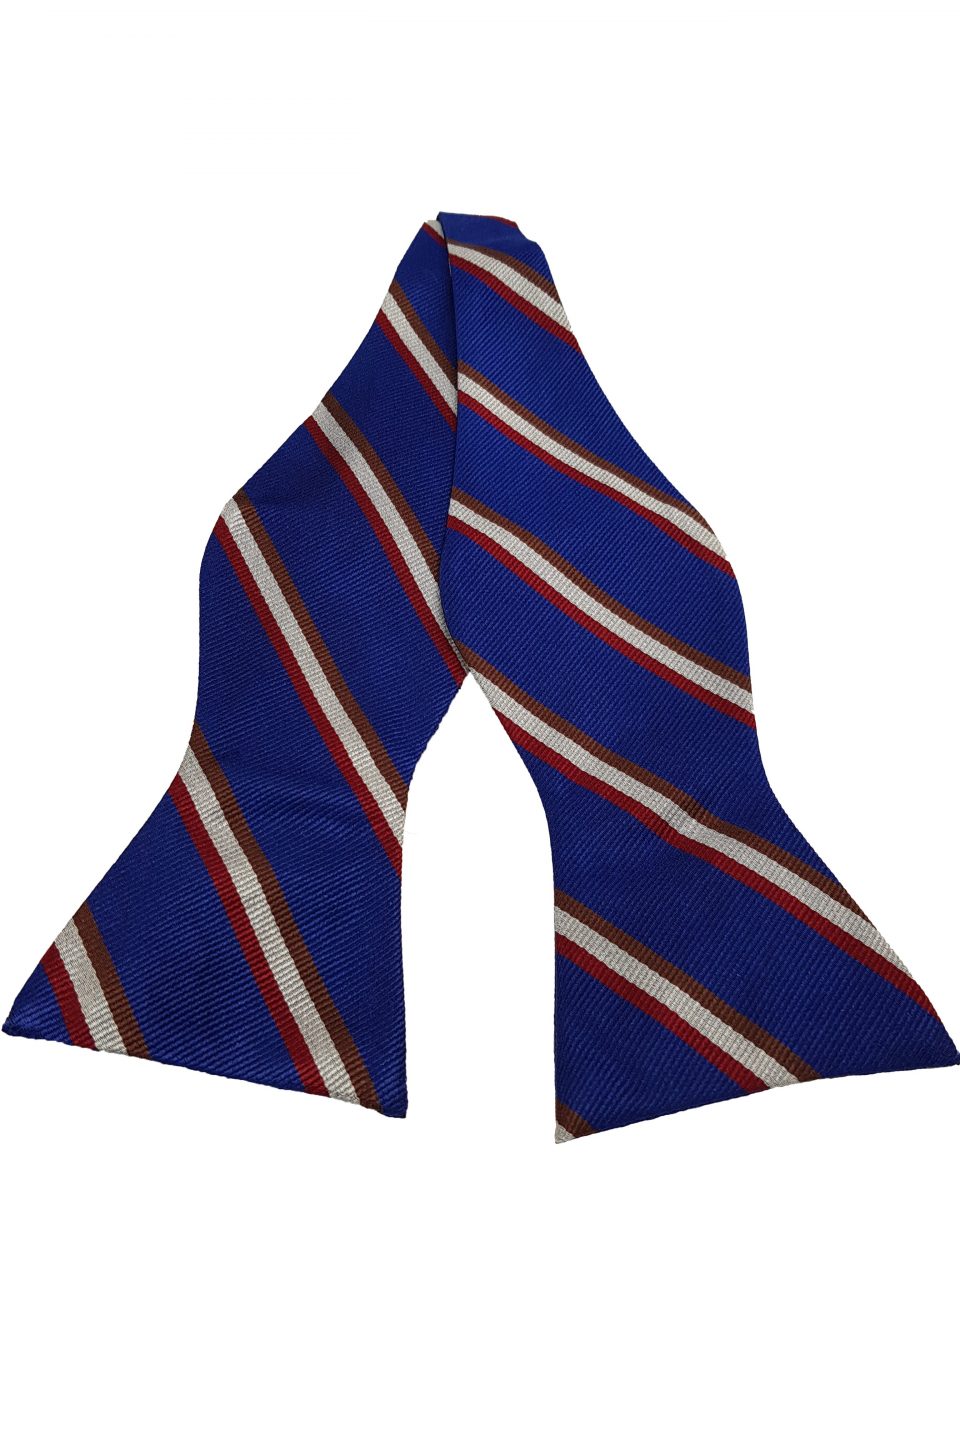 Christ Church College Striped Bow Tie | Walters of Oxford